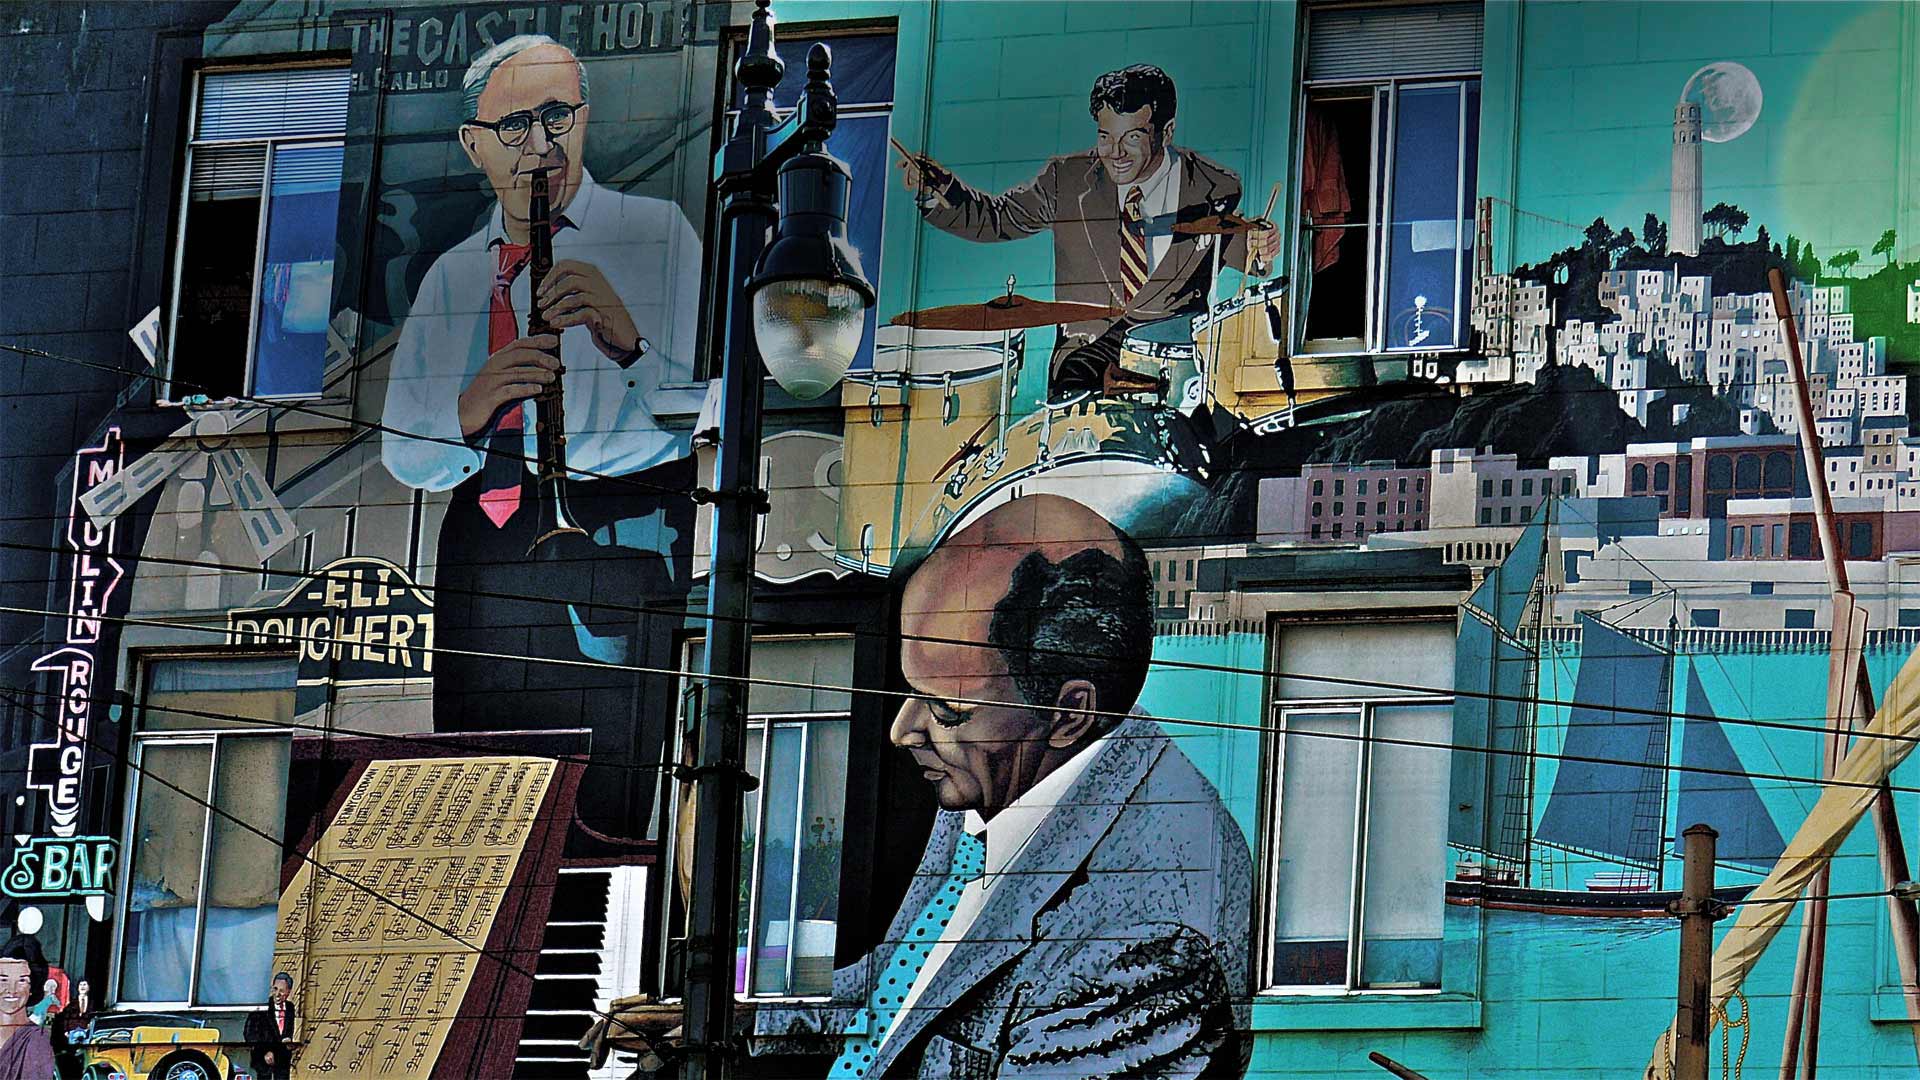 The North Beach Jazz Mural created by Bay Area artist Bill Weber in San Francisco - Kosso/Getty Images)